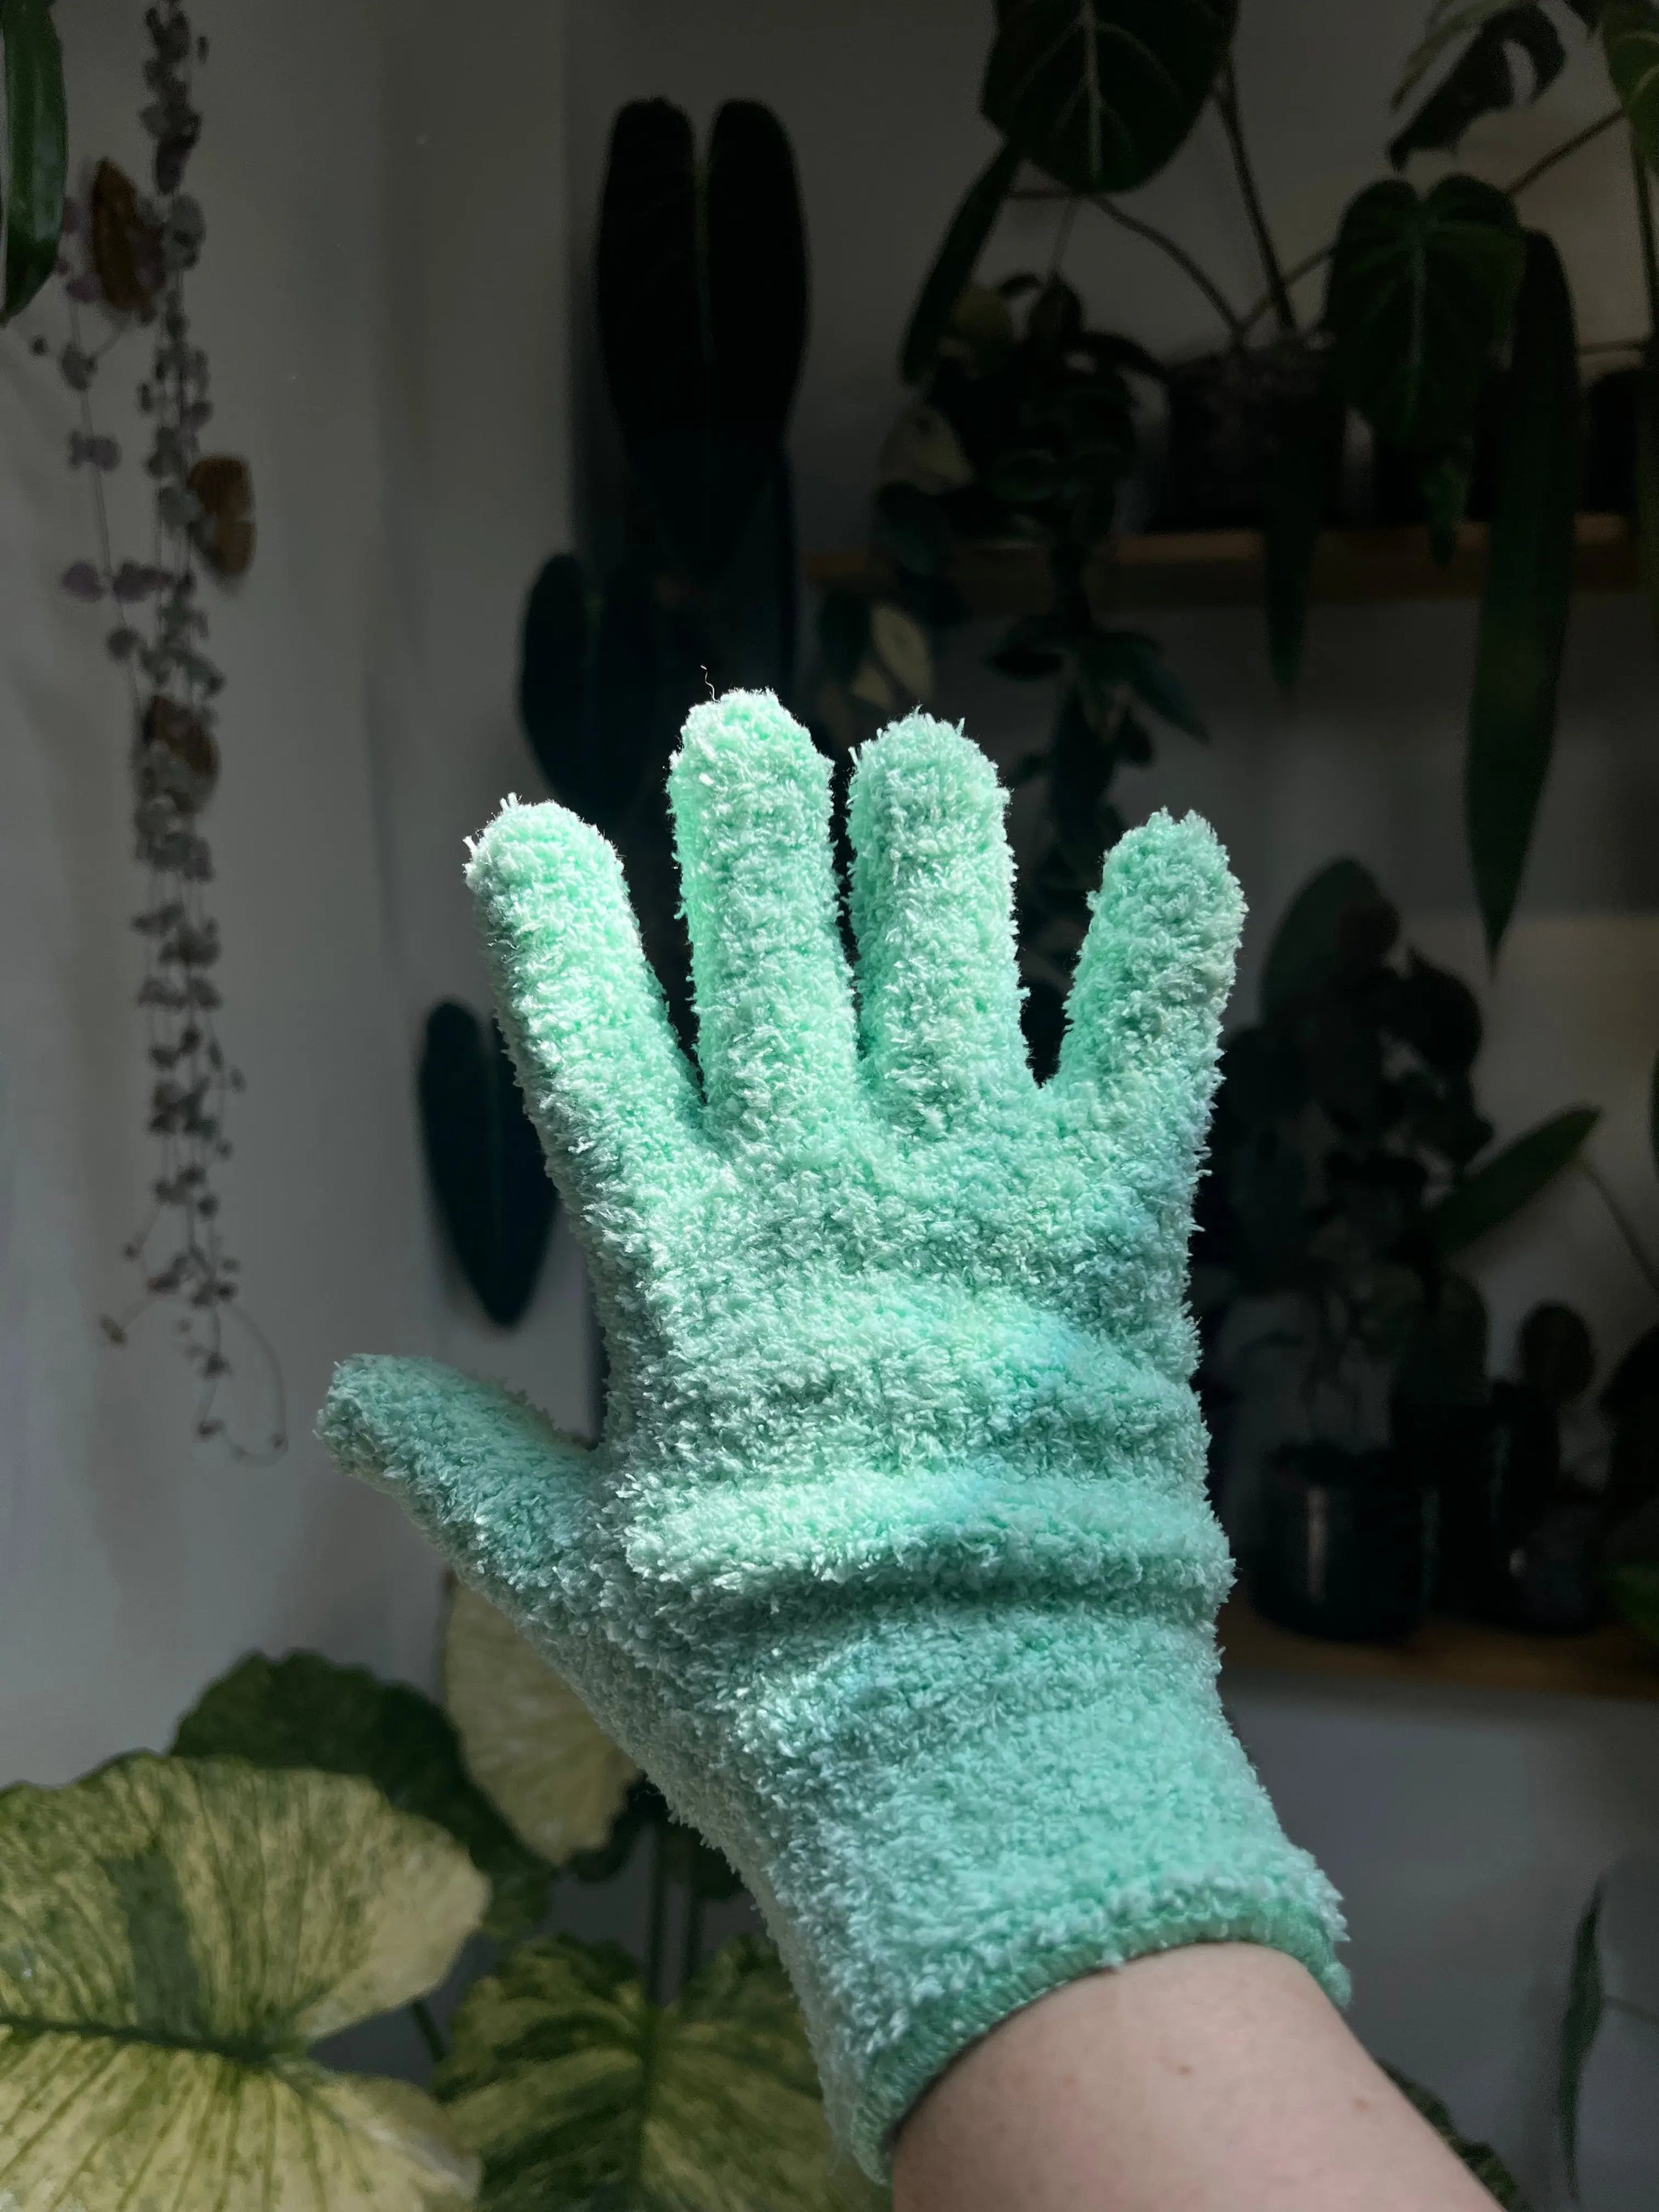 1 Pair of Leaf Shining Microfiber Gloves Gentle Cleaning for Plant Foliage  Ultra-soft Microfiber for Dust Removal 